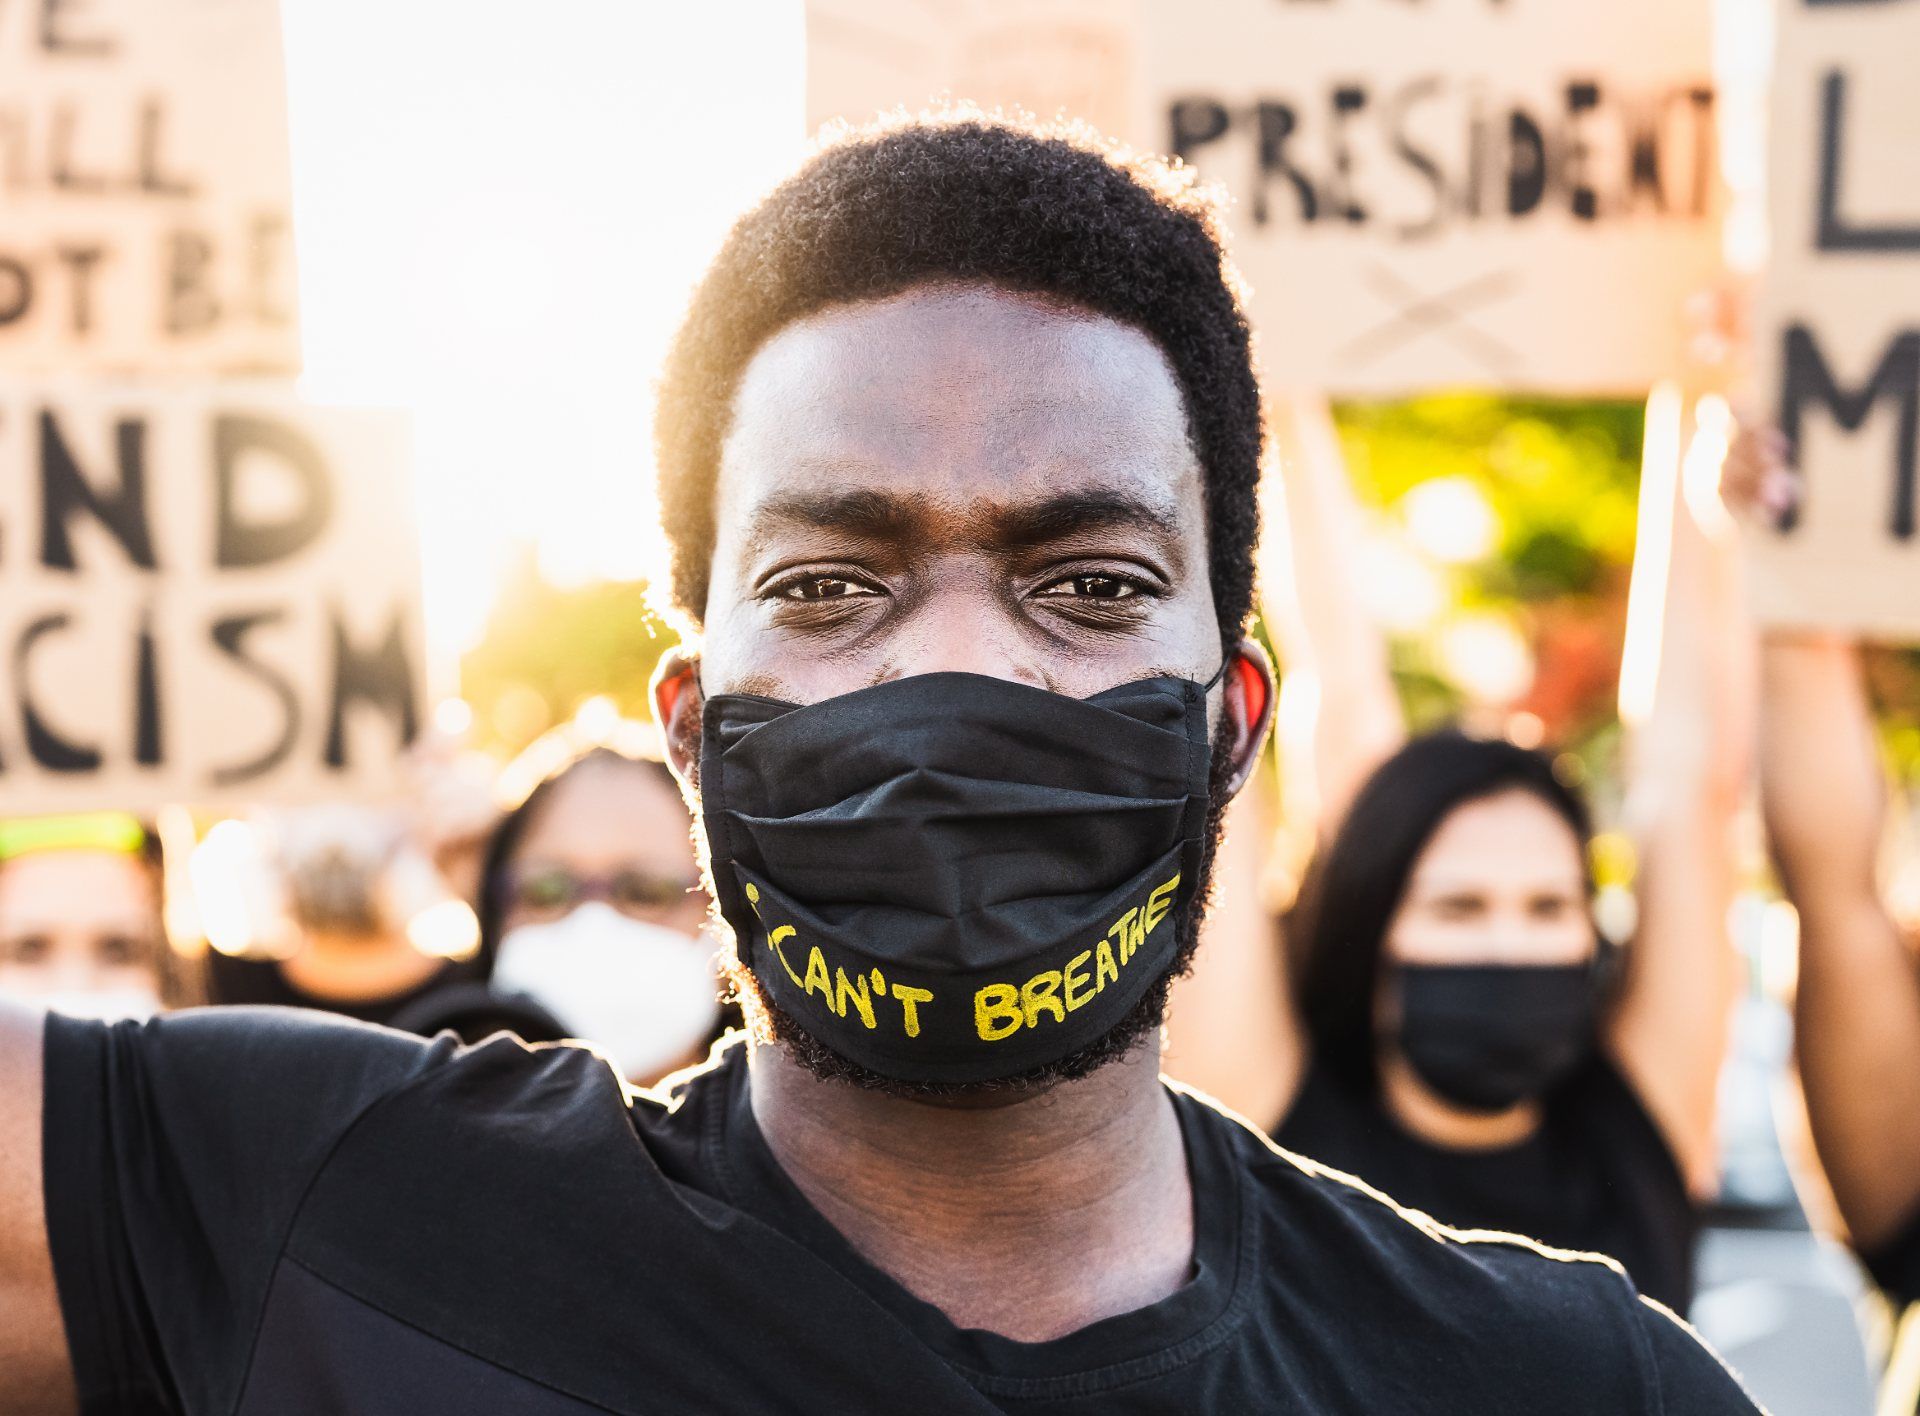 Black man wearing "I can't breathe" face mask stands in front of other protesters - portland protests